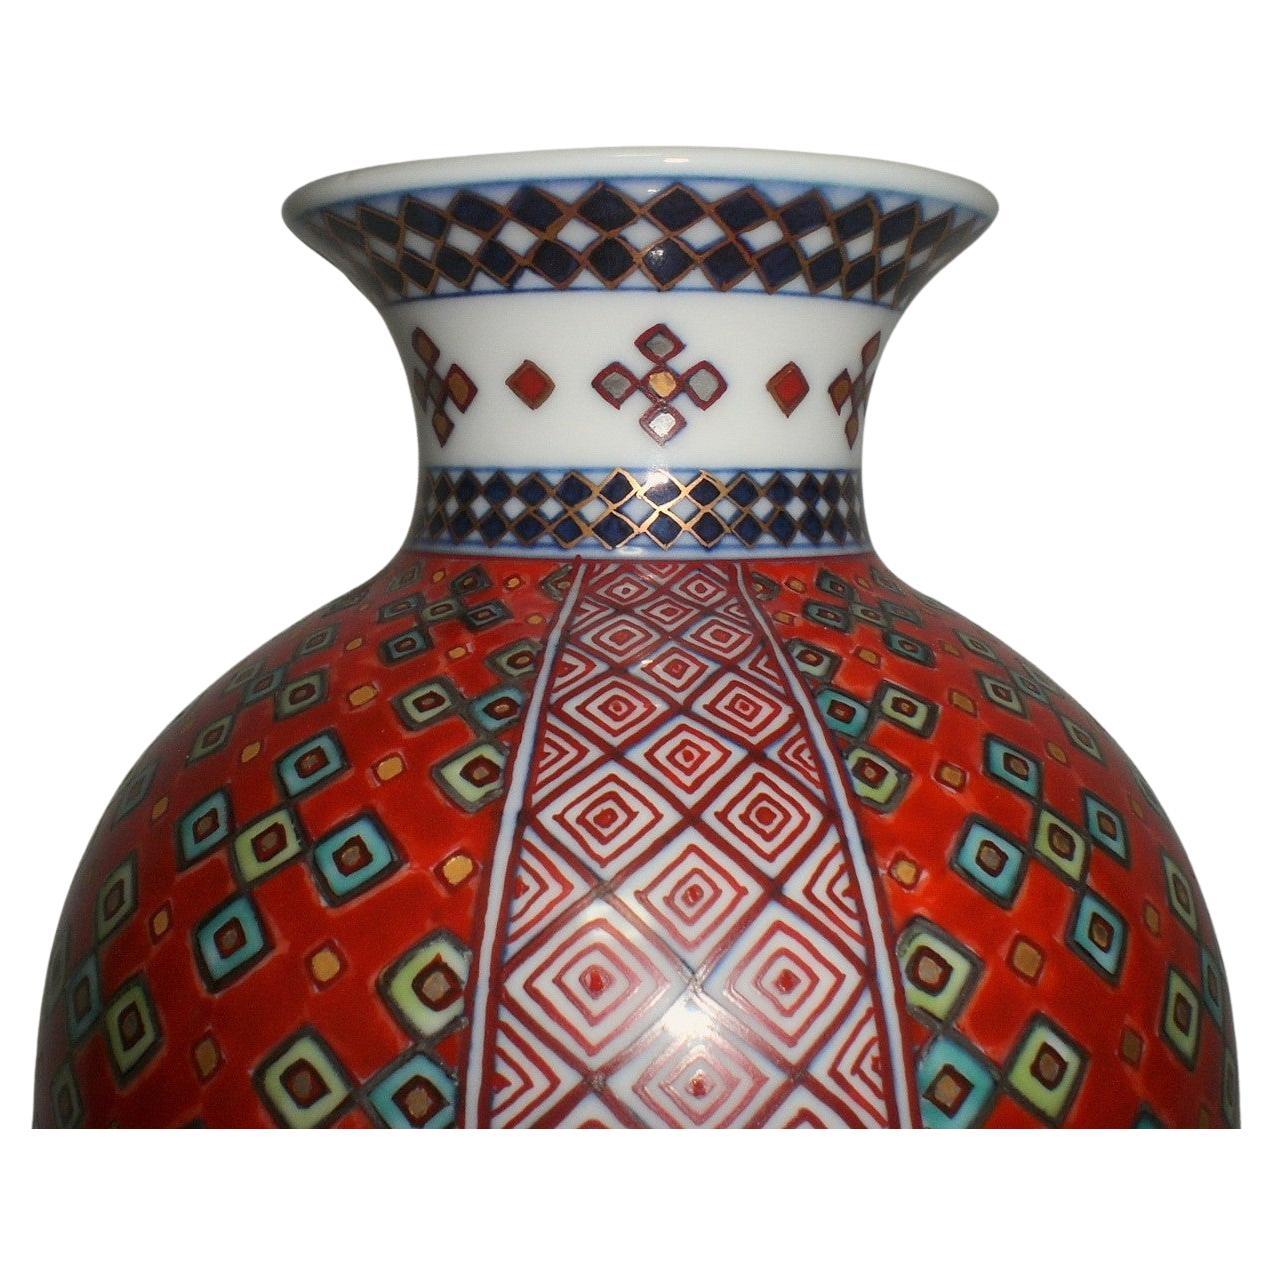 Hand-Painted Contemporary Japanese Gilded Red Blue Porcelain Vase by Master Artist For Sale